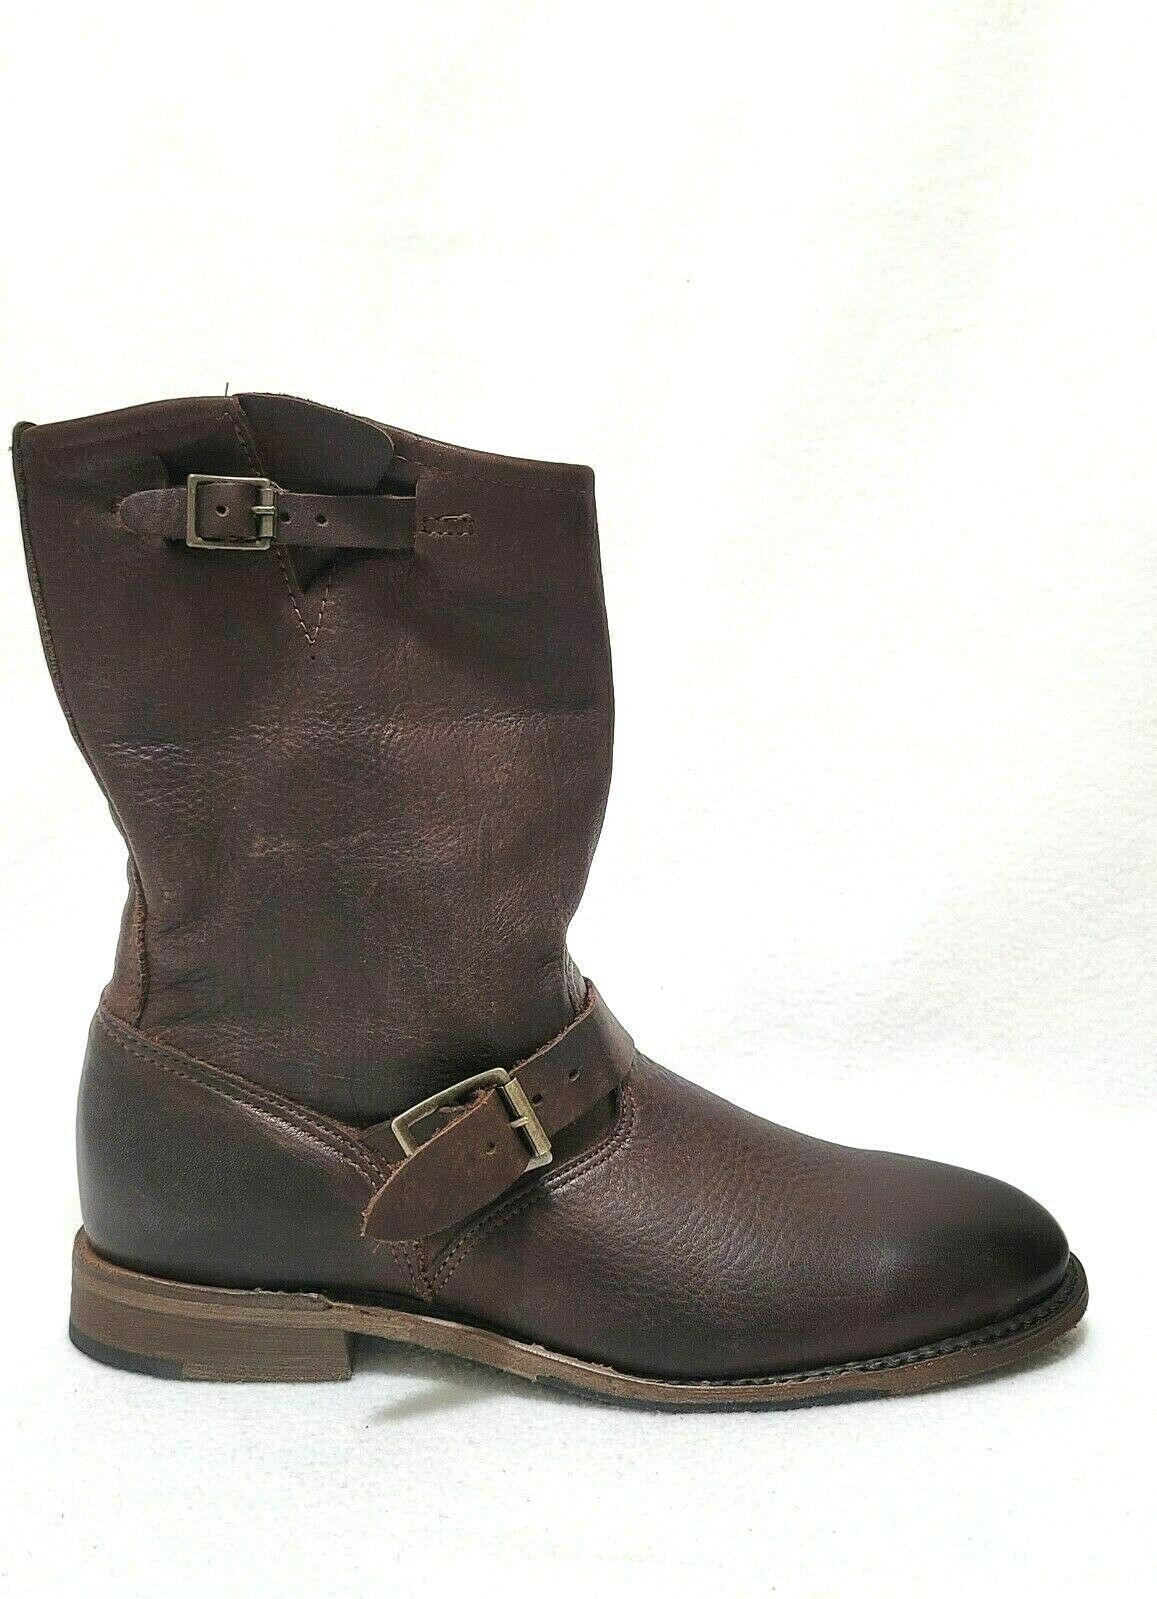 Walk Over Vintage Shoe Co leather Veronica Harness Slouchy Moto Boots Size US 10 - SVNYFancy